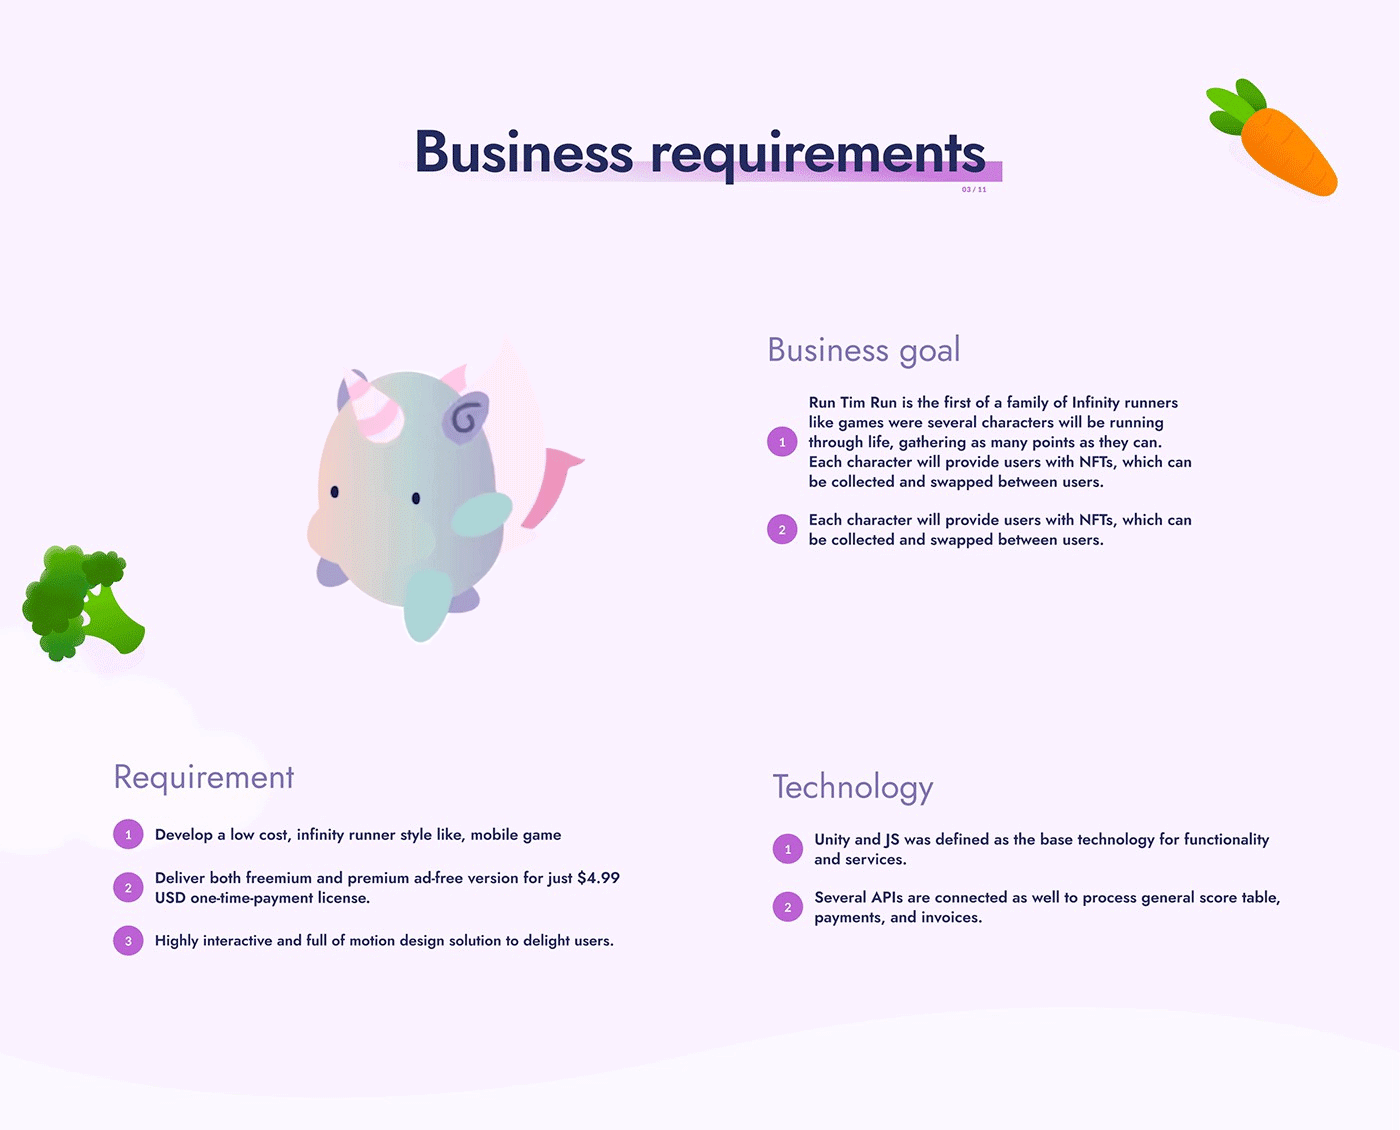 Business requirements